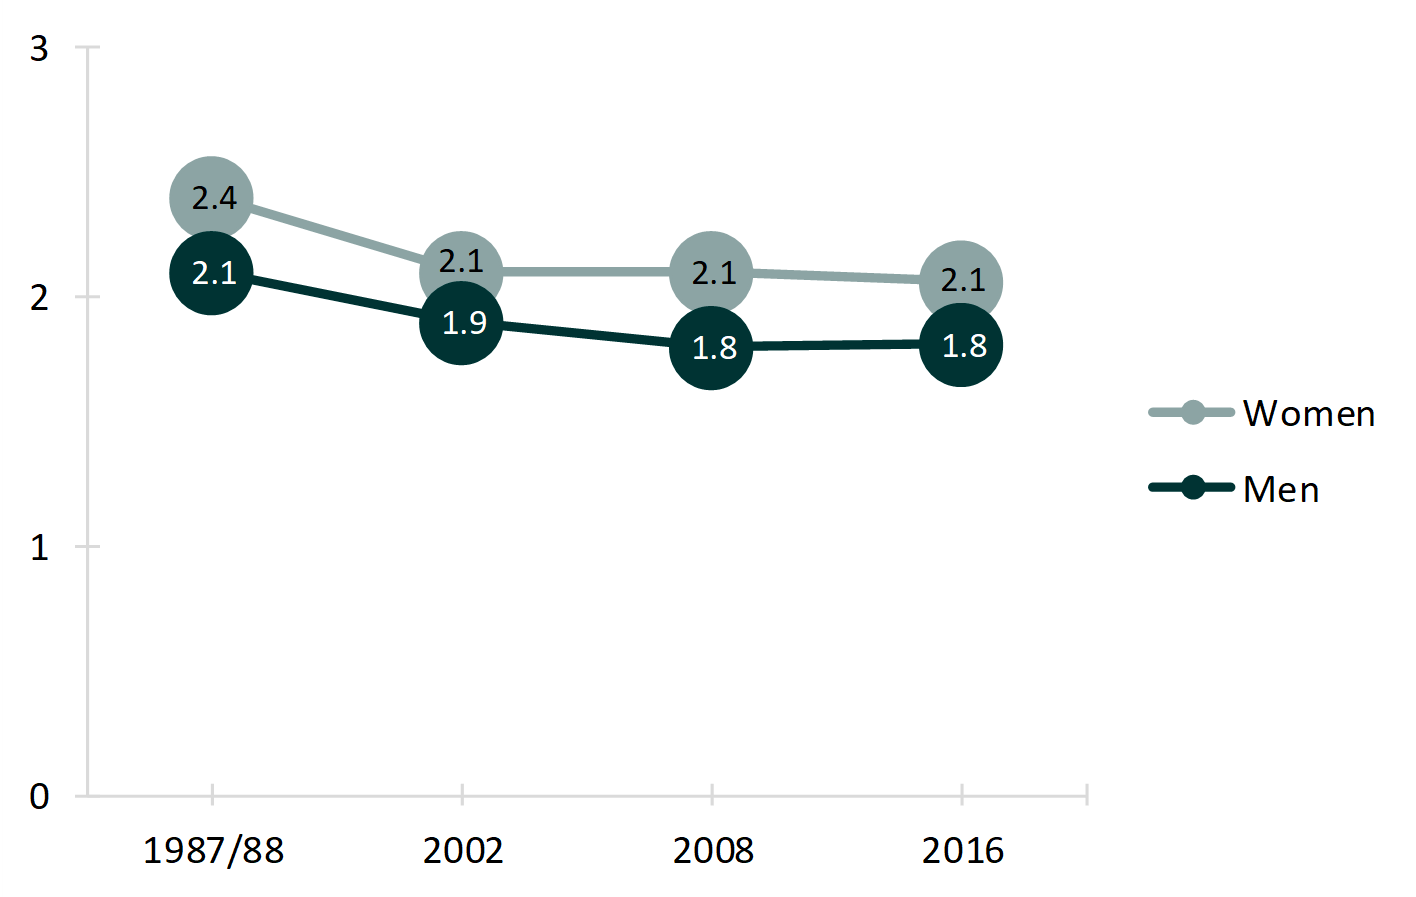 line graph in teal tones Mean Number of Children for Men and Women in the U.S. aged 40- 44, 1987-2016